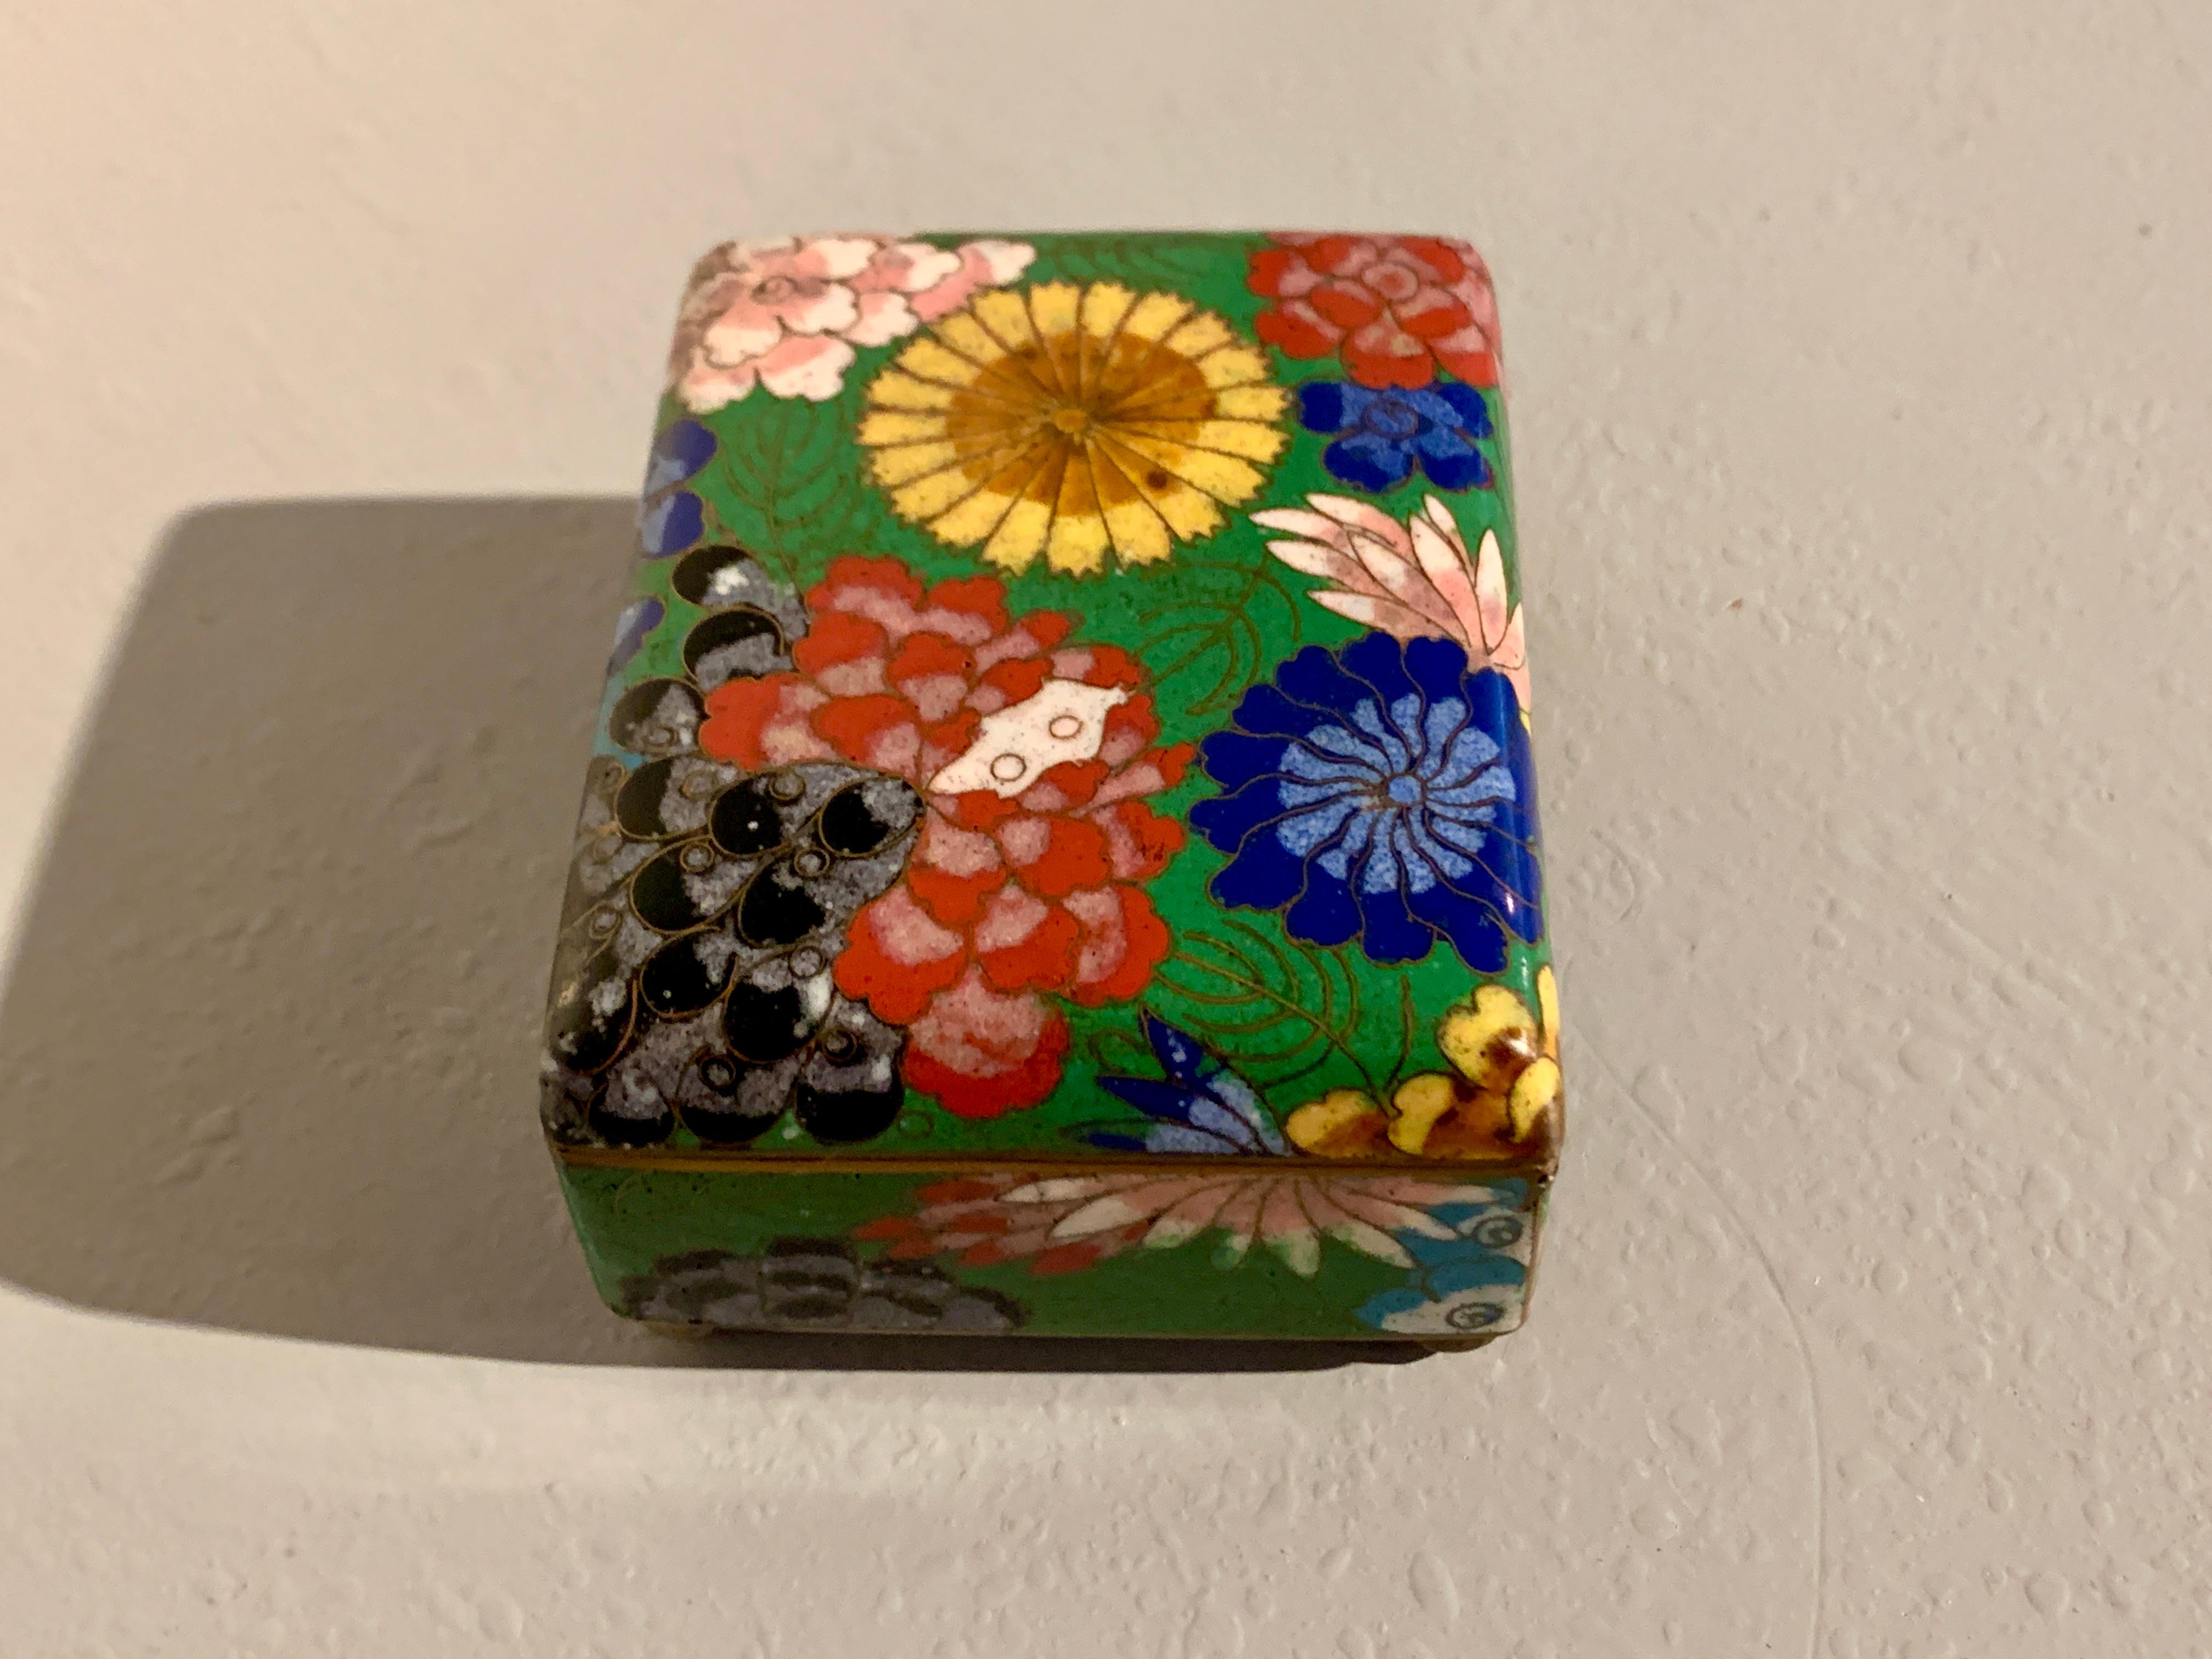 A small a charming Chinese cloisonne trinket box with floral design, Republic Period, circa 1930s, China.

The small copper trinket box decorated in cloisonne enamel technique with bold and bright floral blossoms in shades of yellow, pink, red,